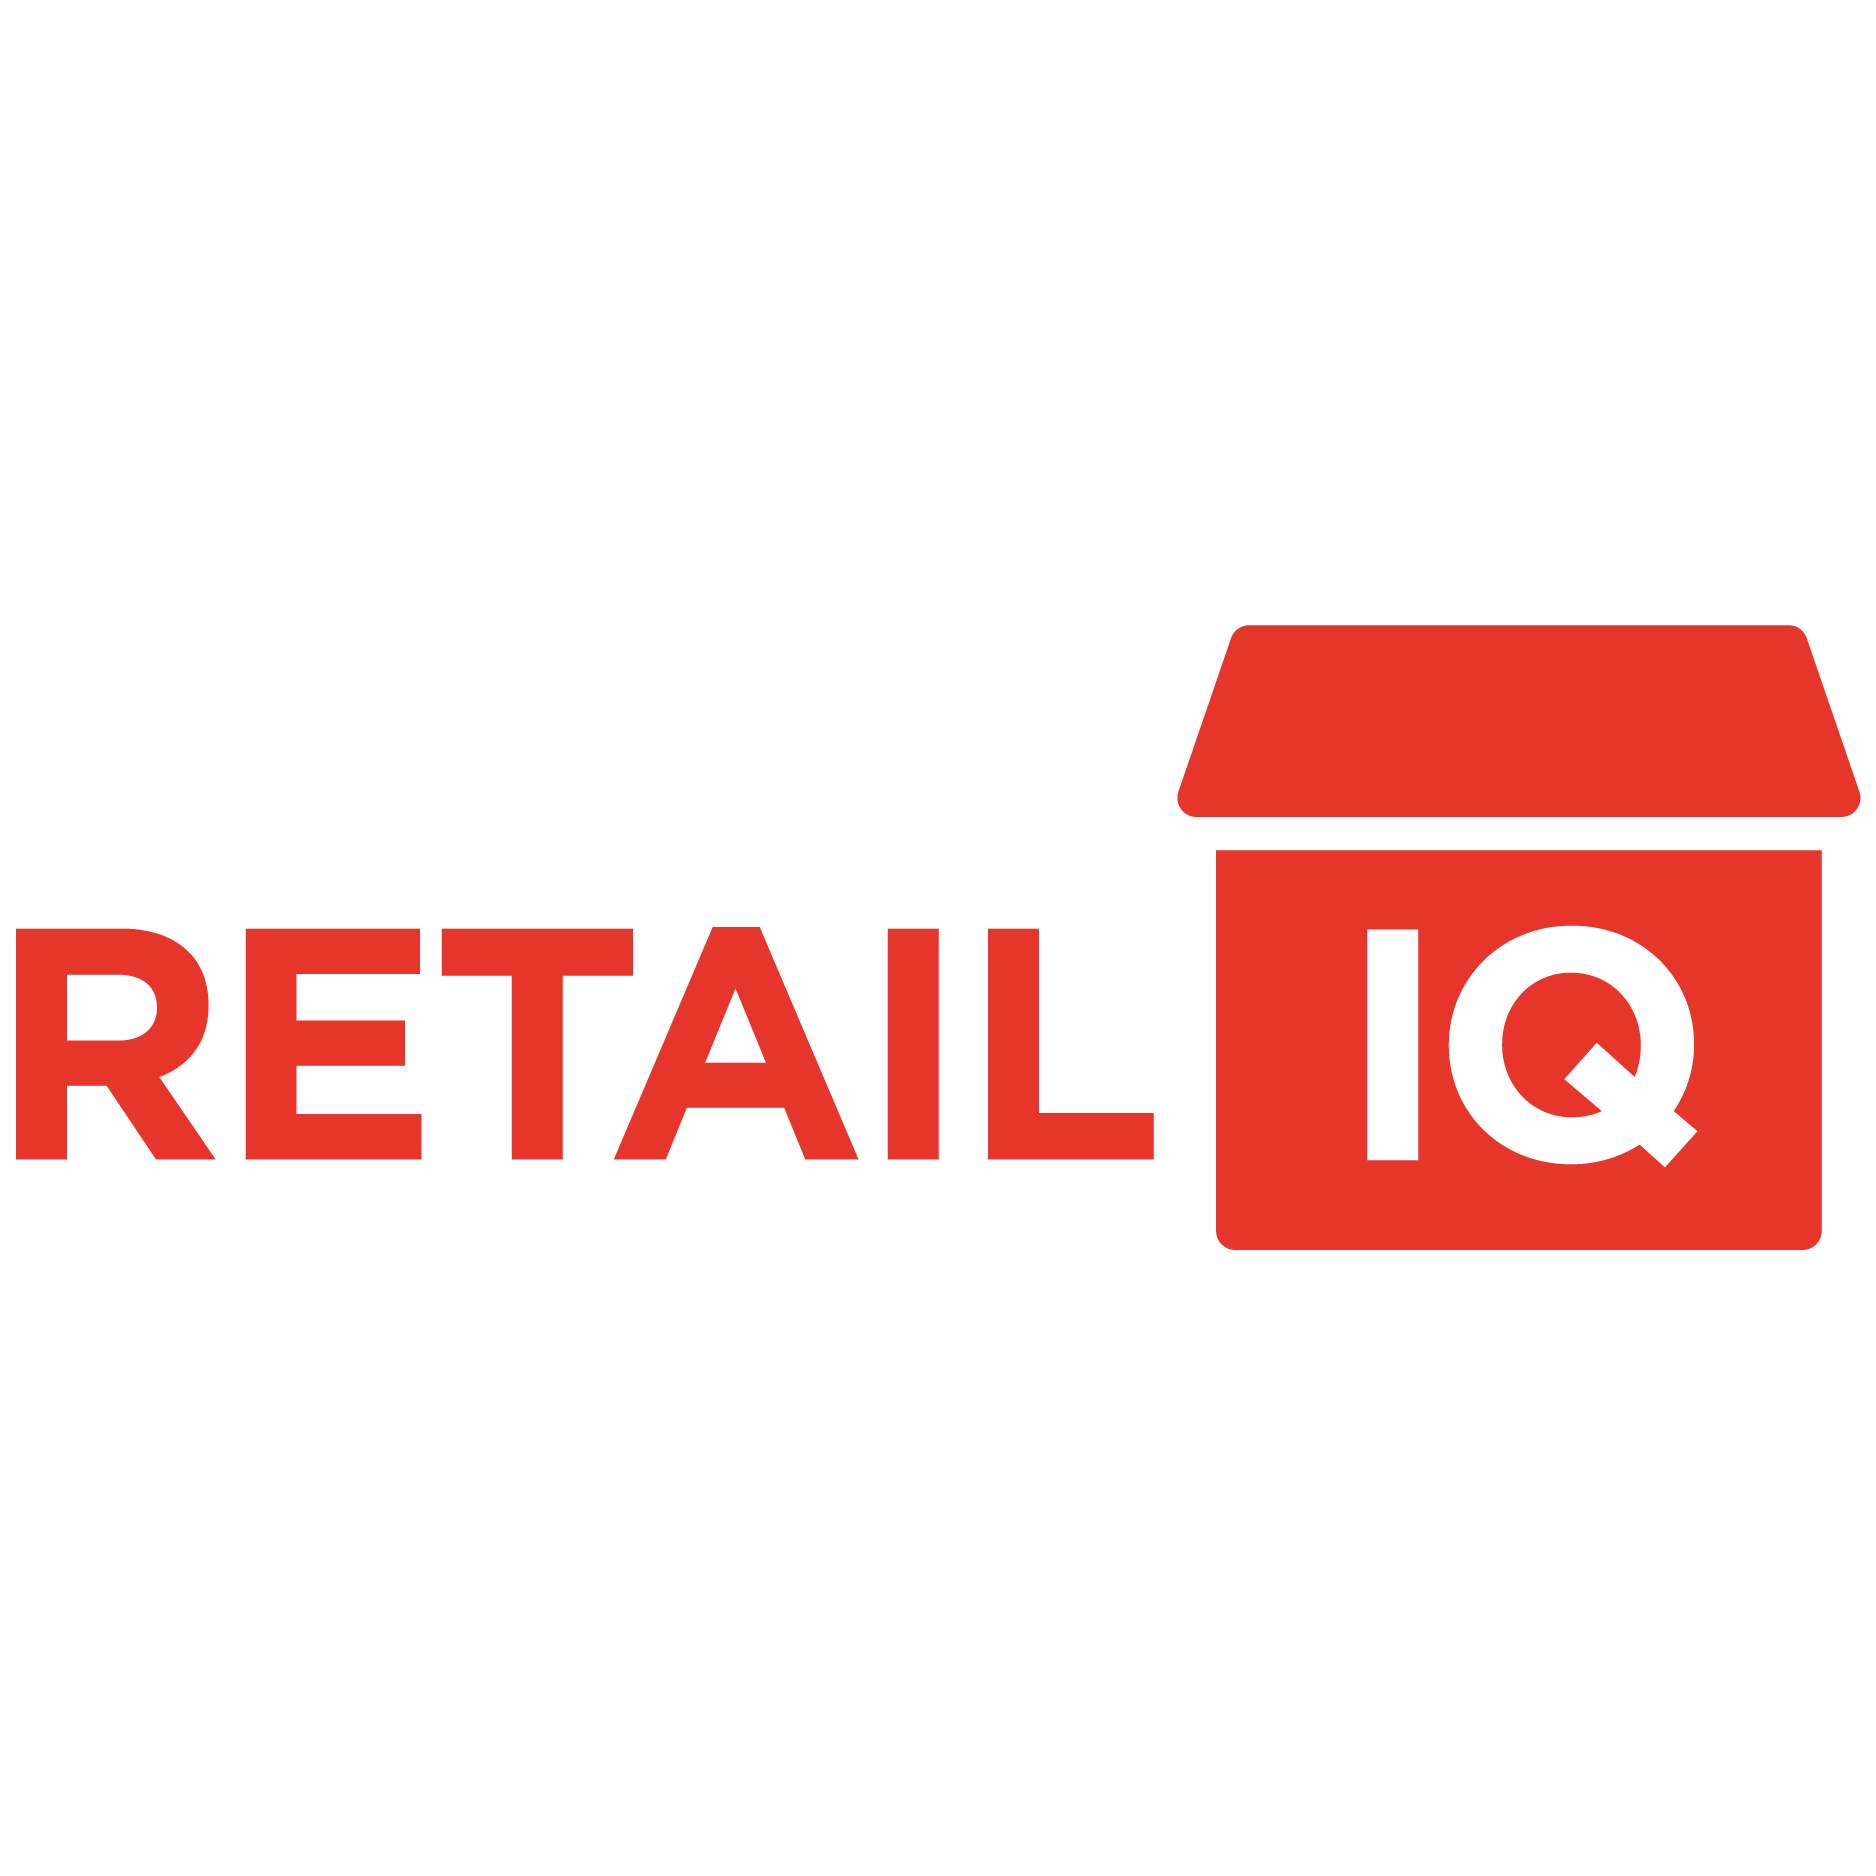 Retail IQ logo design by logo designer LITTLE Agency for your inspiration and for the worlds largest logo competition